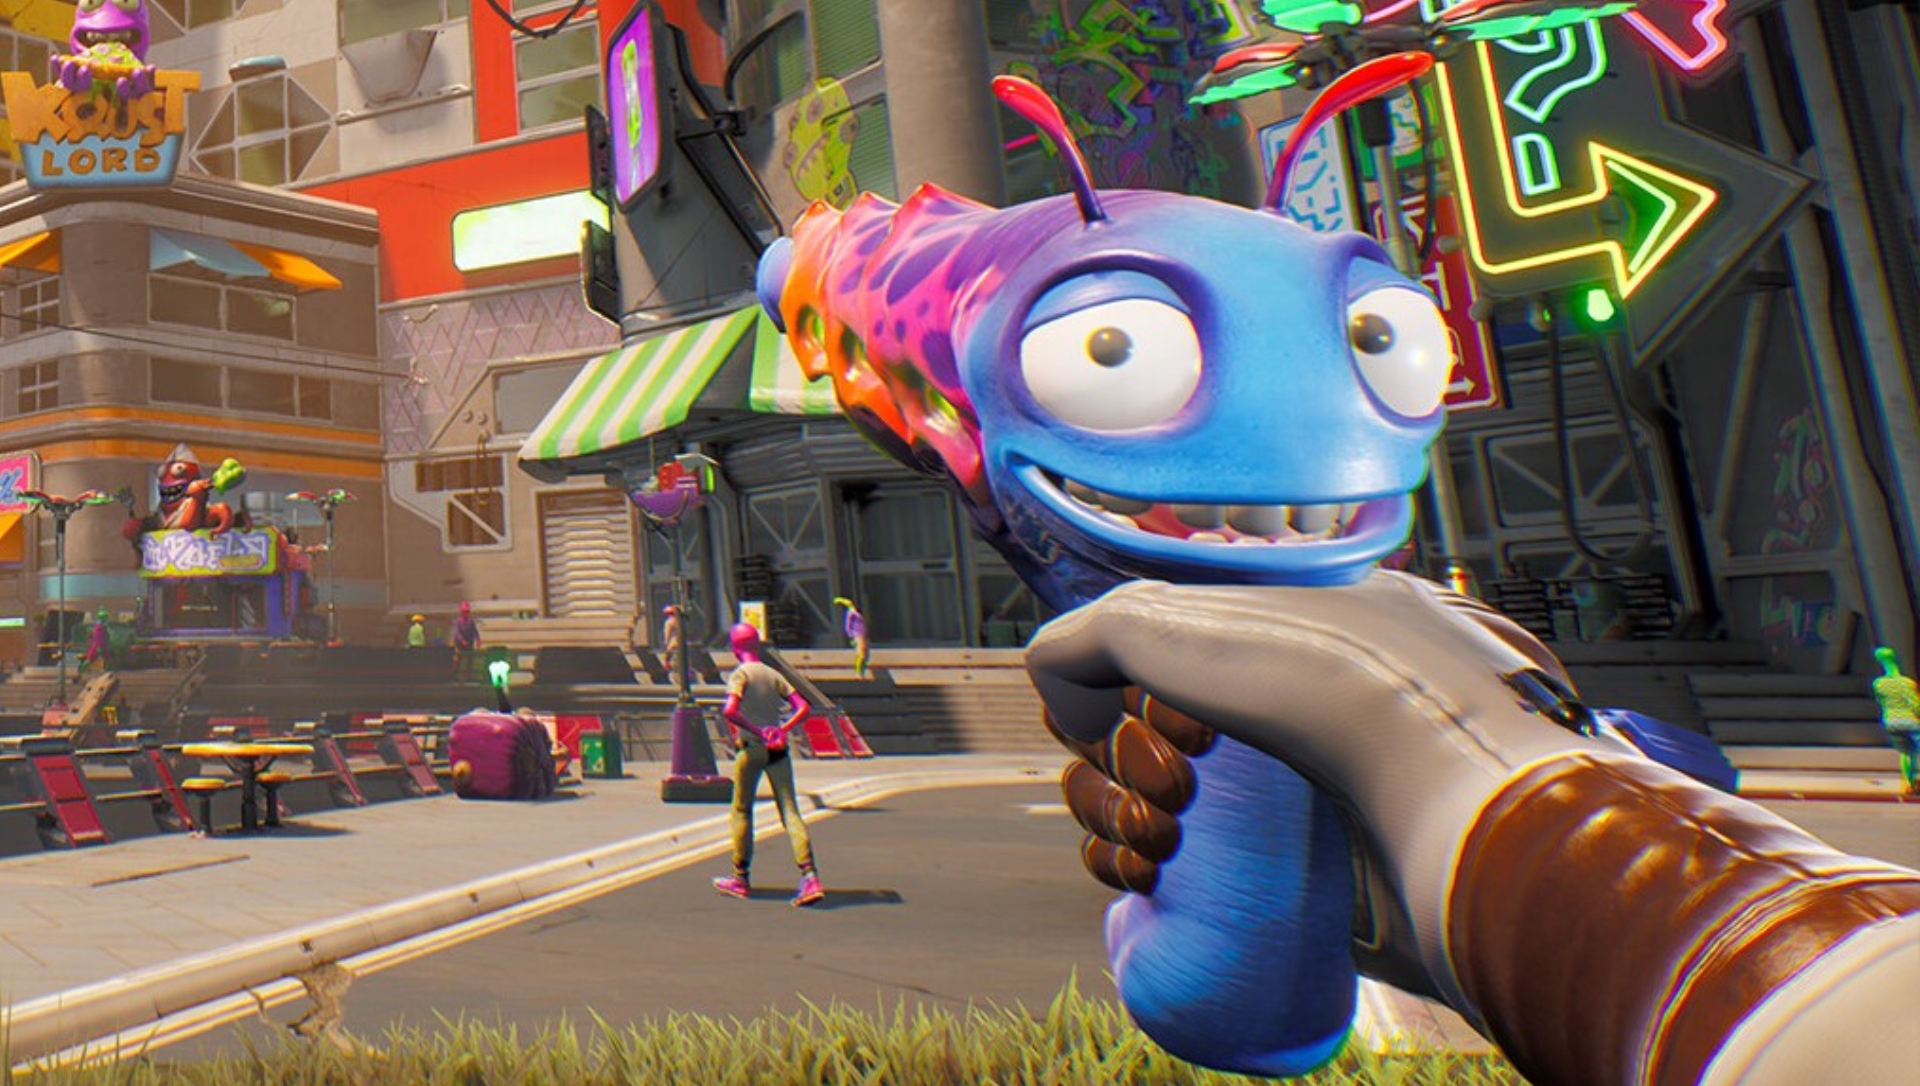 High On Life is a perfectly-pitched FPS from Rick and Morty